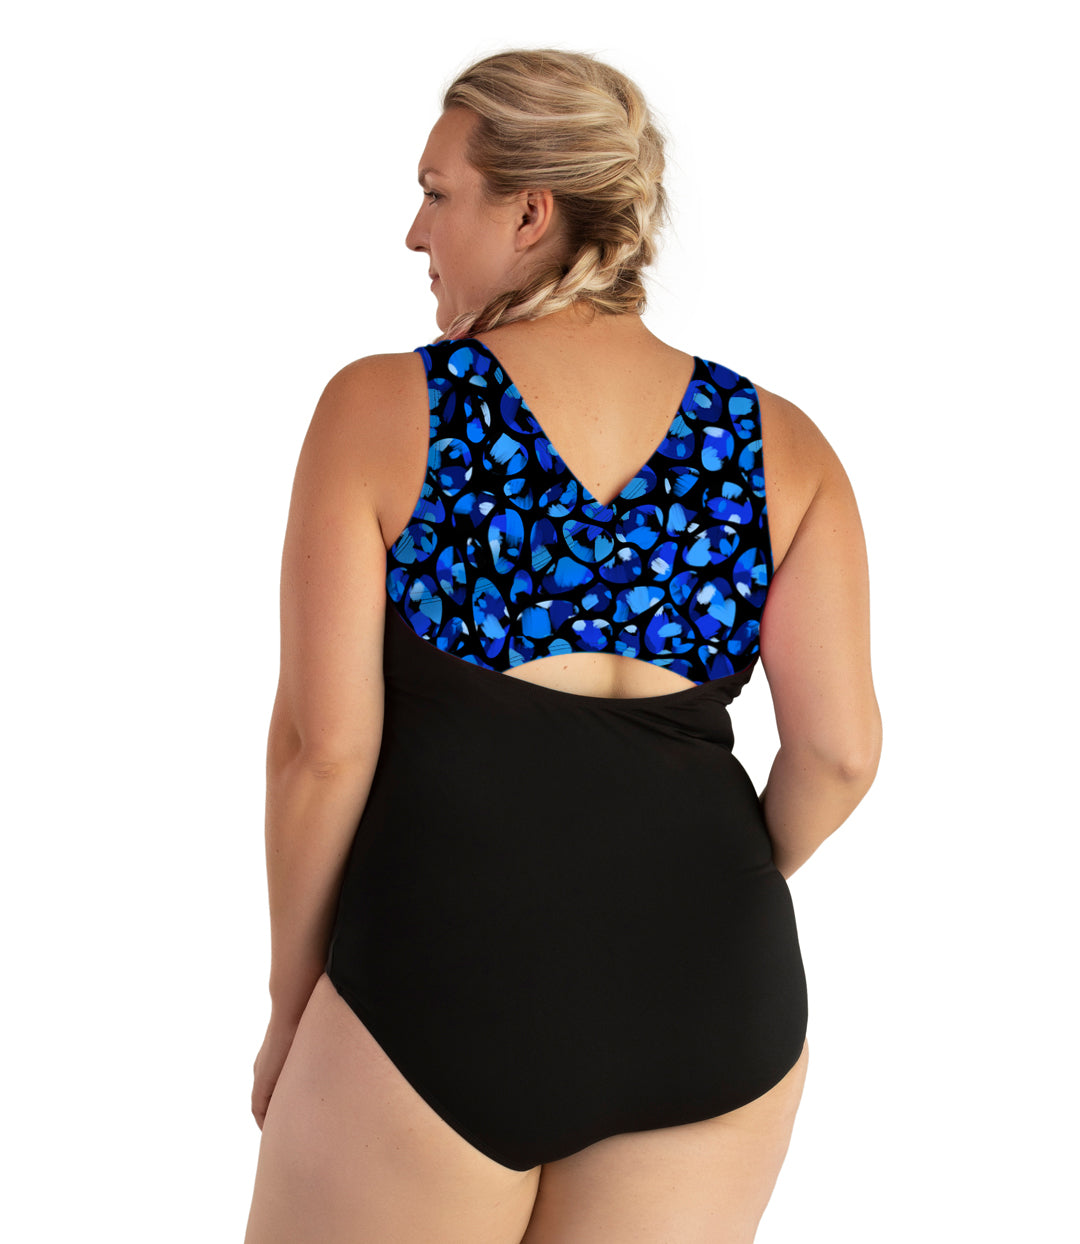 Plus size woman, back view, wearing JunoActive plus size AquaSport Crossback Tanksuit Ocean Blues Print Black. The crossback shoulder detail of the tanksuit has a multi colored blue bubble print. The main body of the suit is solid black, keyhole opening at the mid-back.